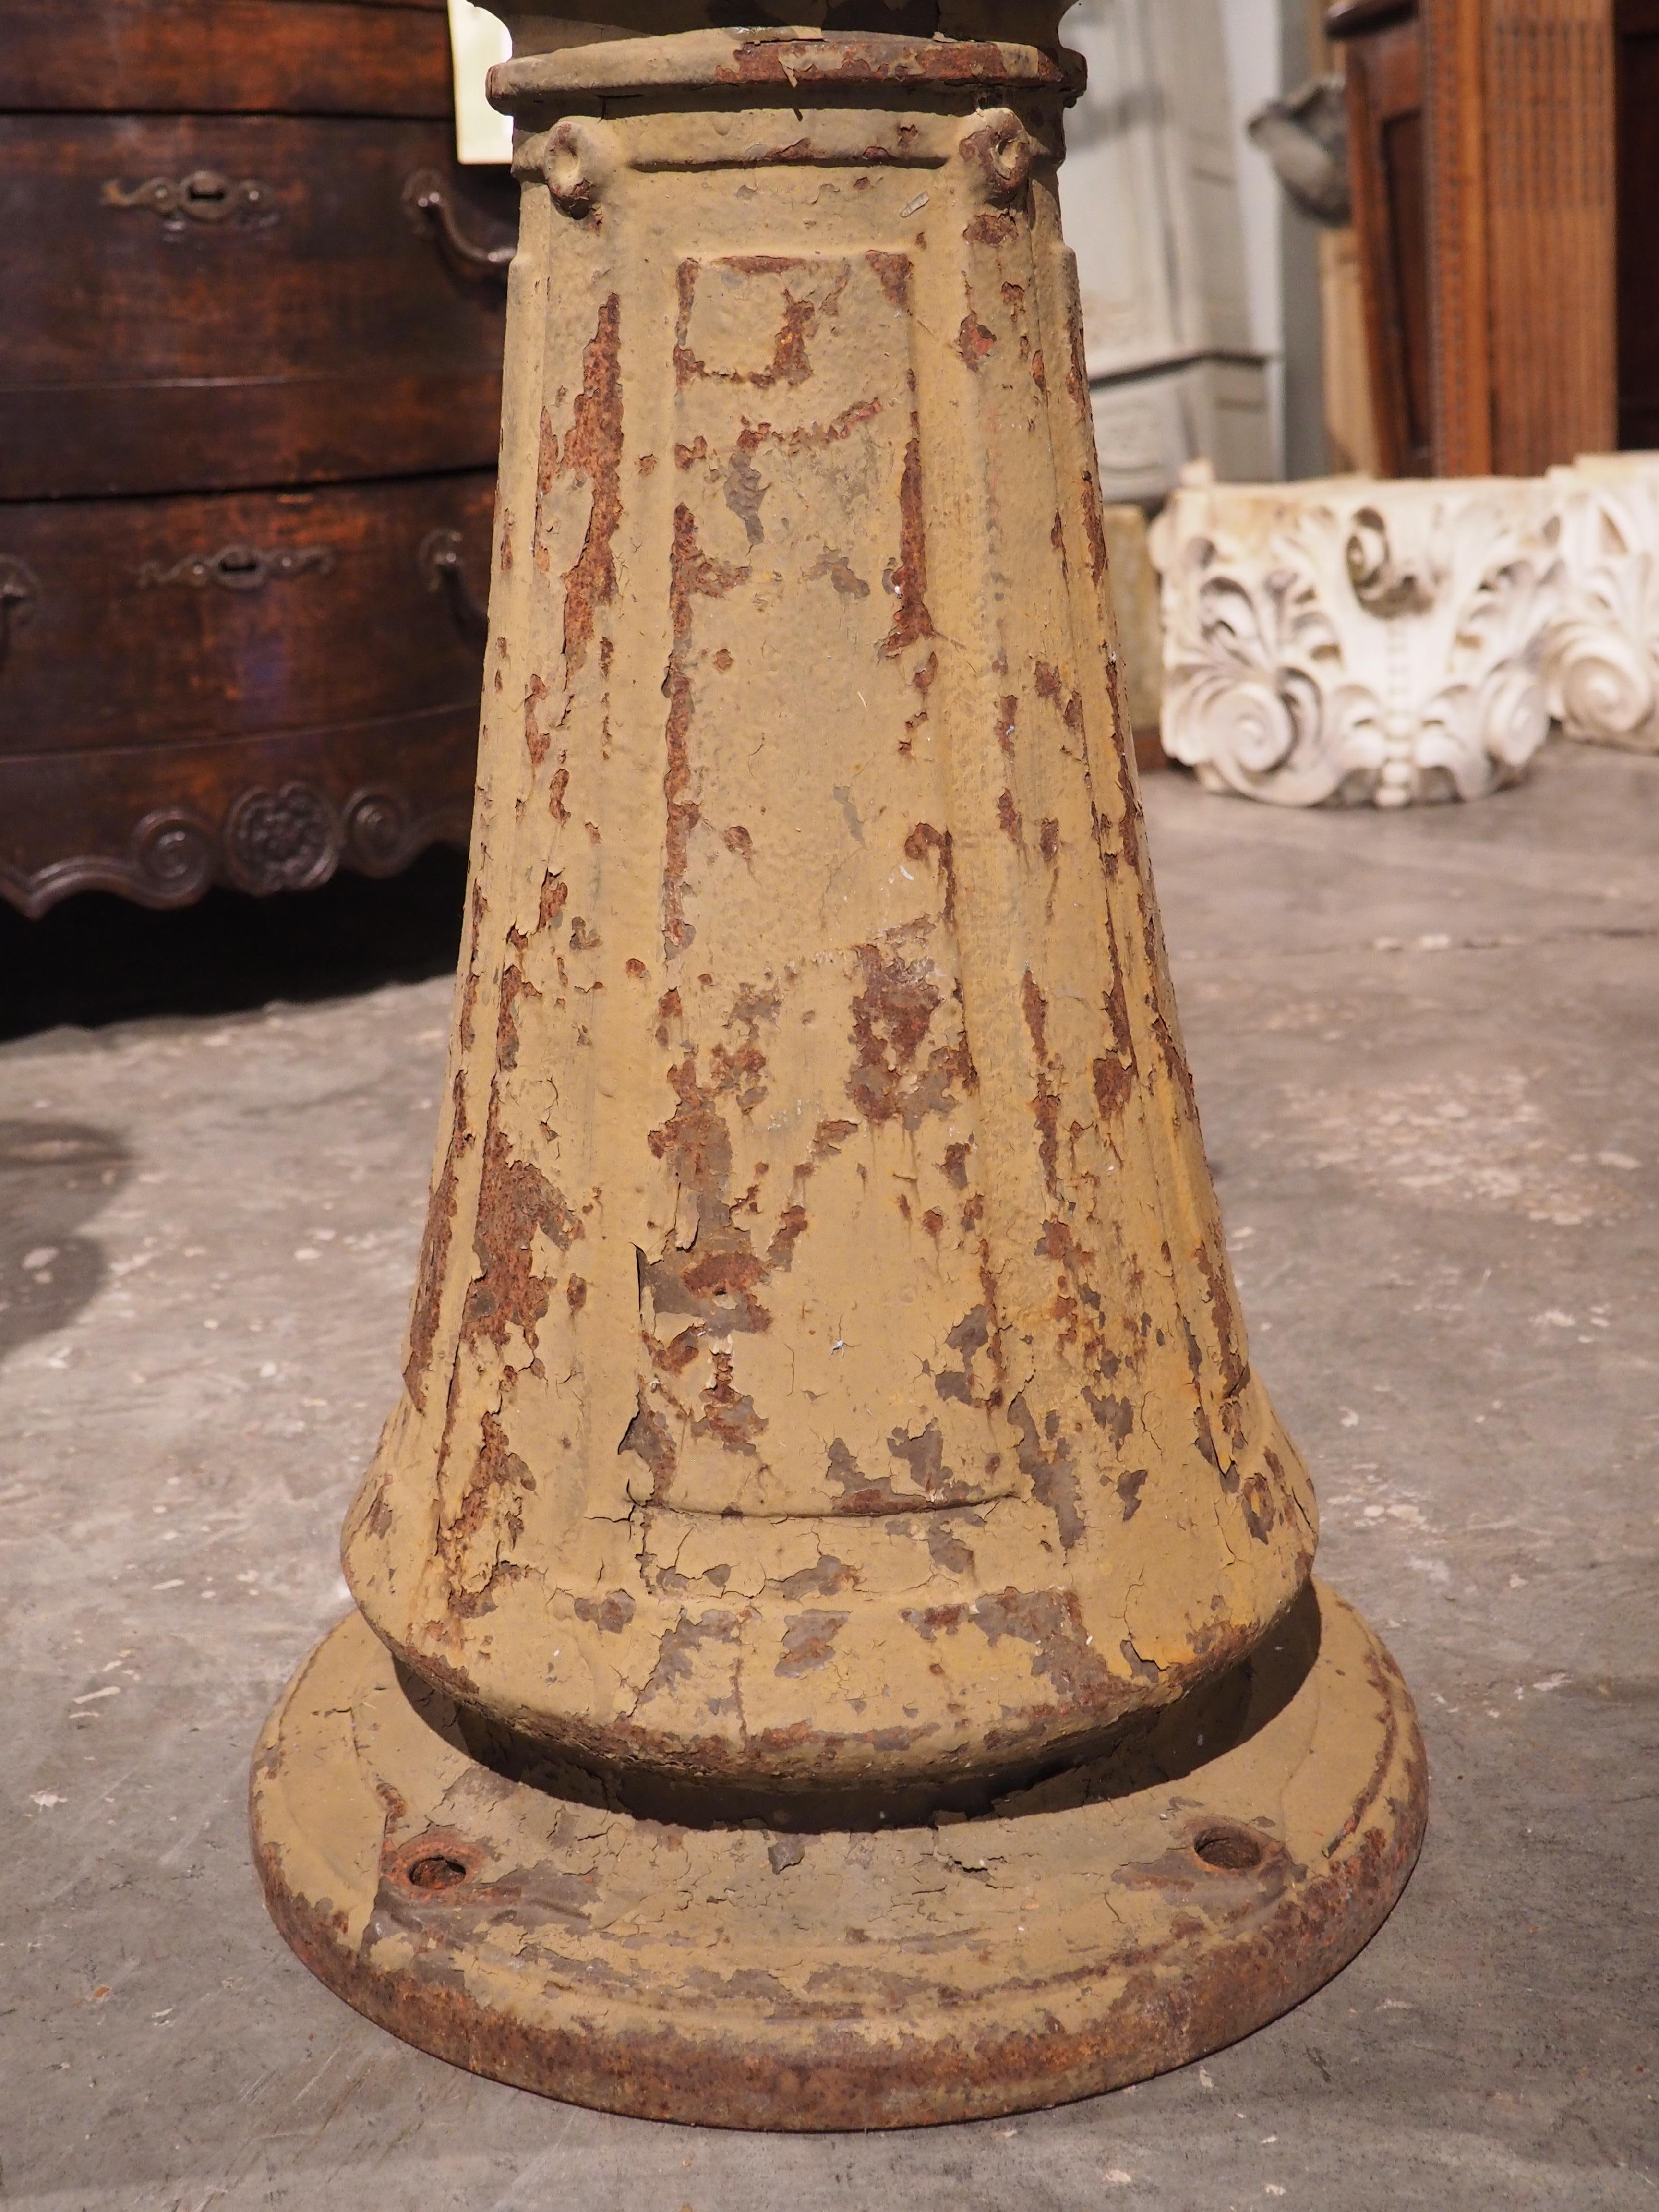 Bollards in their original form were short posts along a wharf’s edge designed to secure boats. Eventually, bollards were adapted for use along roadways, serving as methods of controlling traffic and protecting pedestrians. Our pair of cast iron